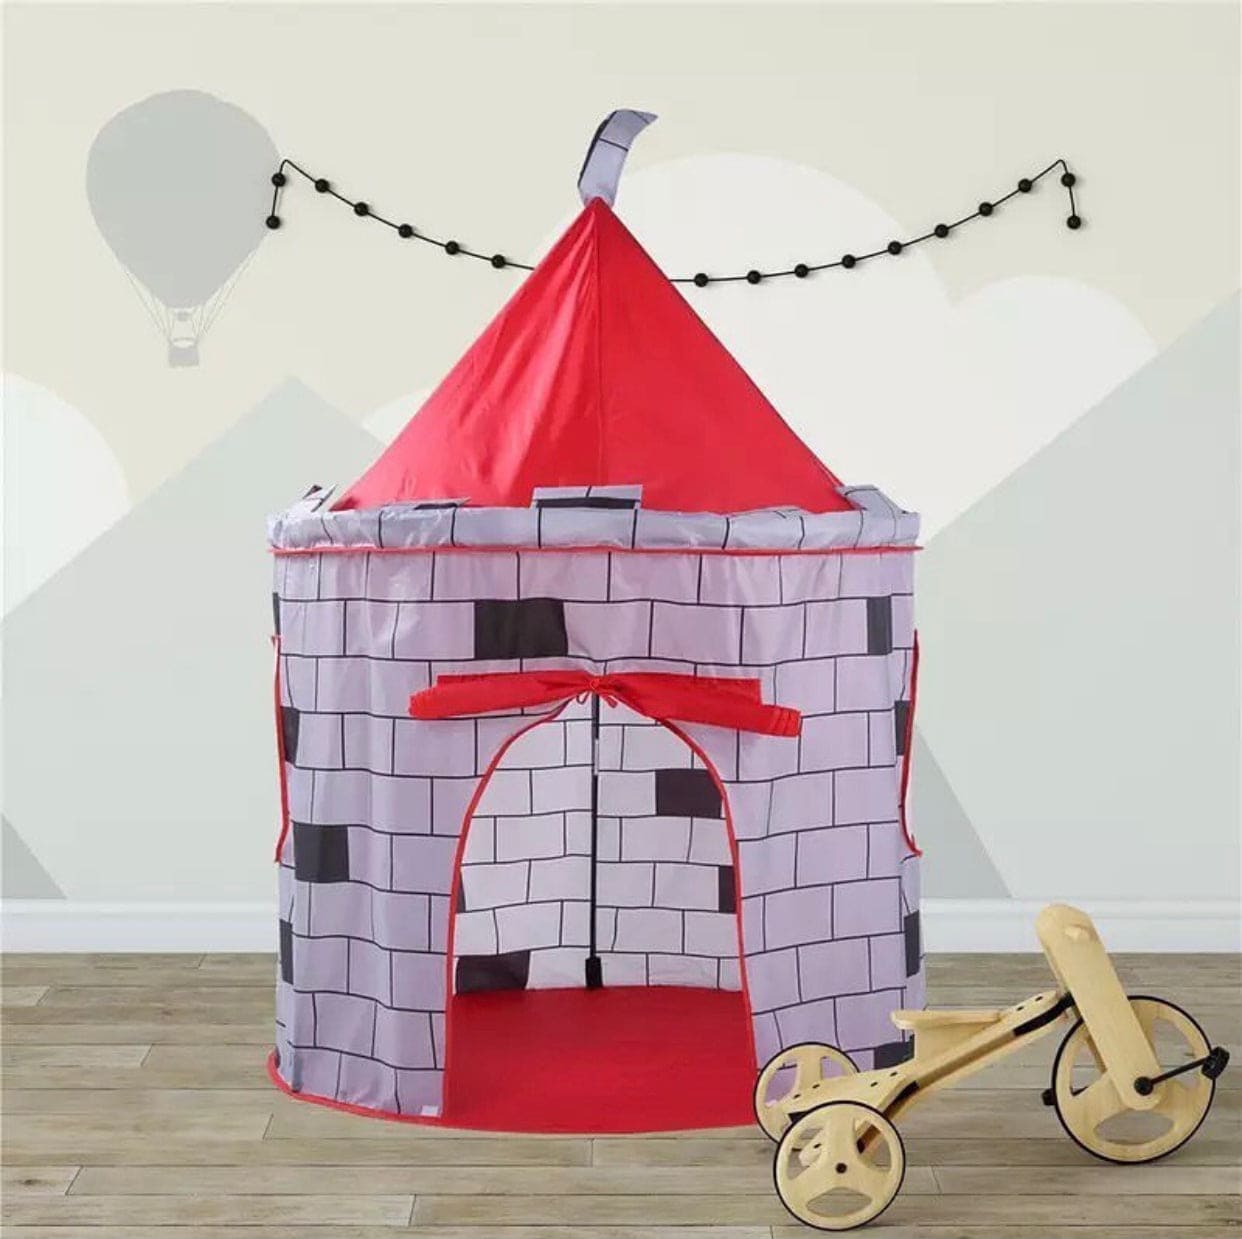 Foldable Fort Style Outdoor Camping Tent, Indoor & Outdoor Large Kids Play Tent, Durable Kids Playhouse, Foldable Storage Pop Up Tent